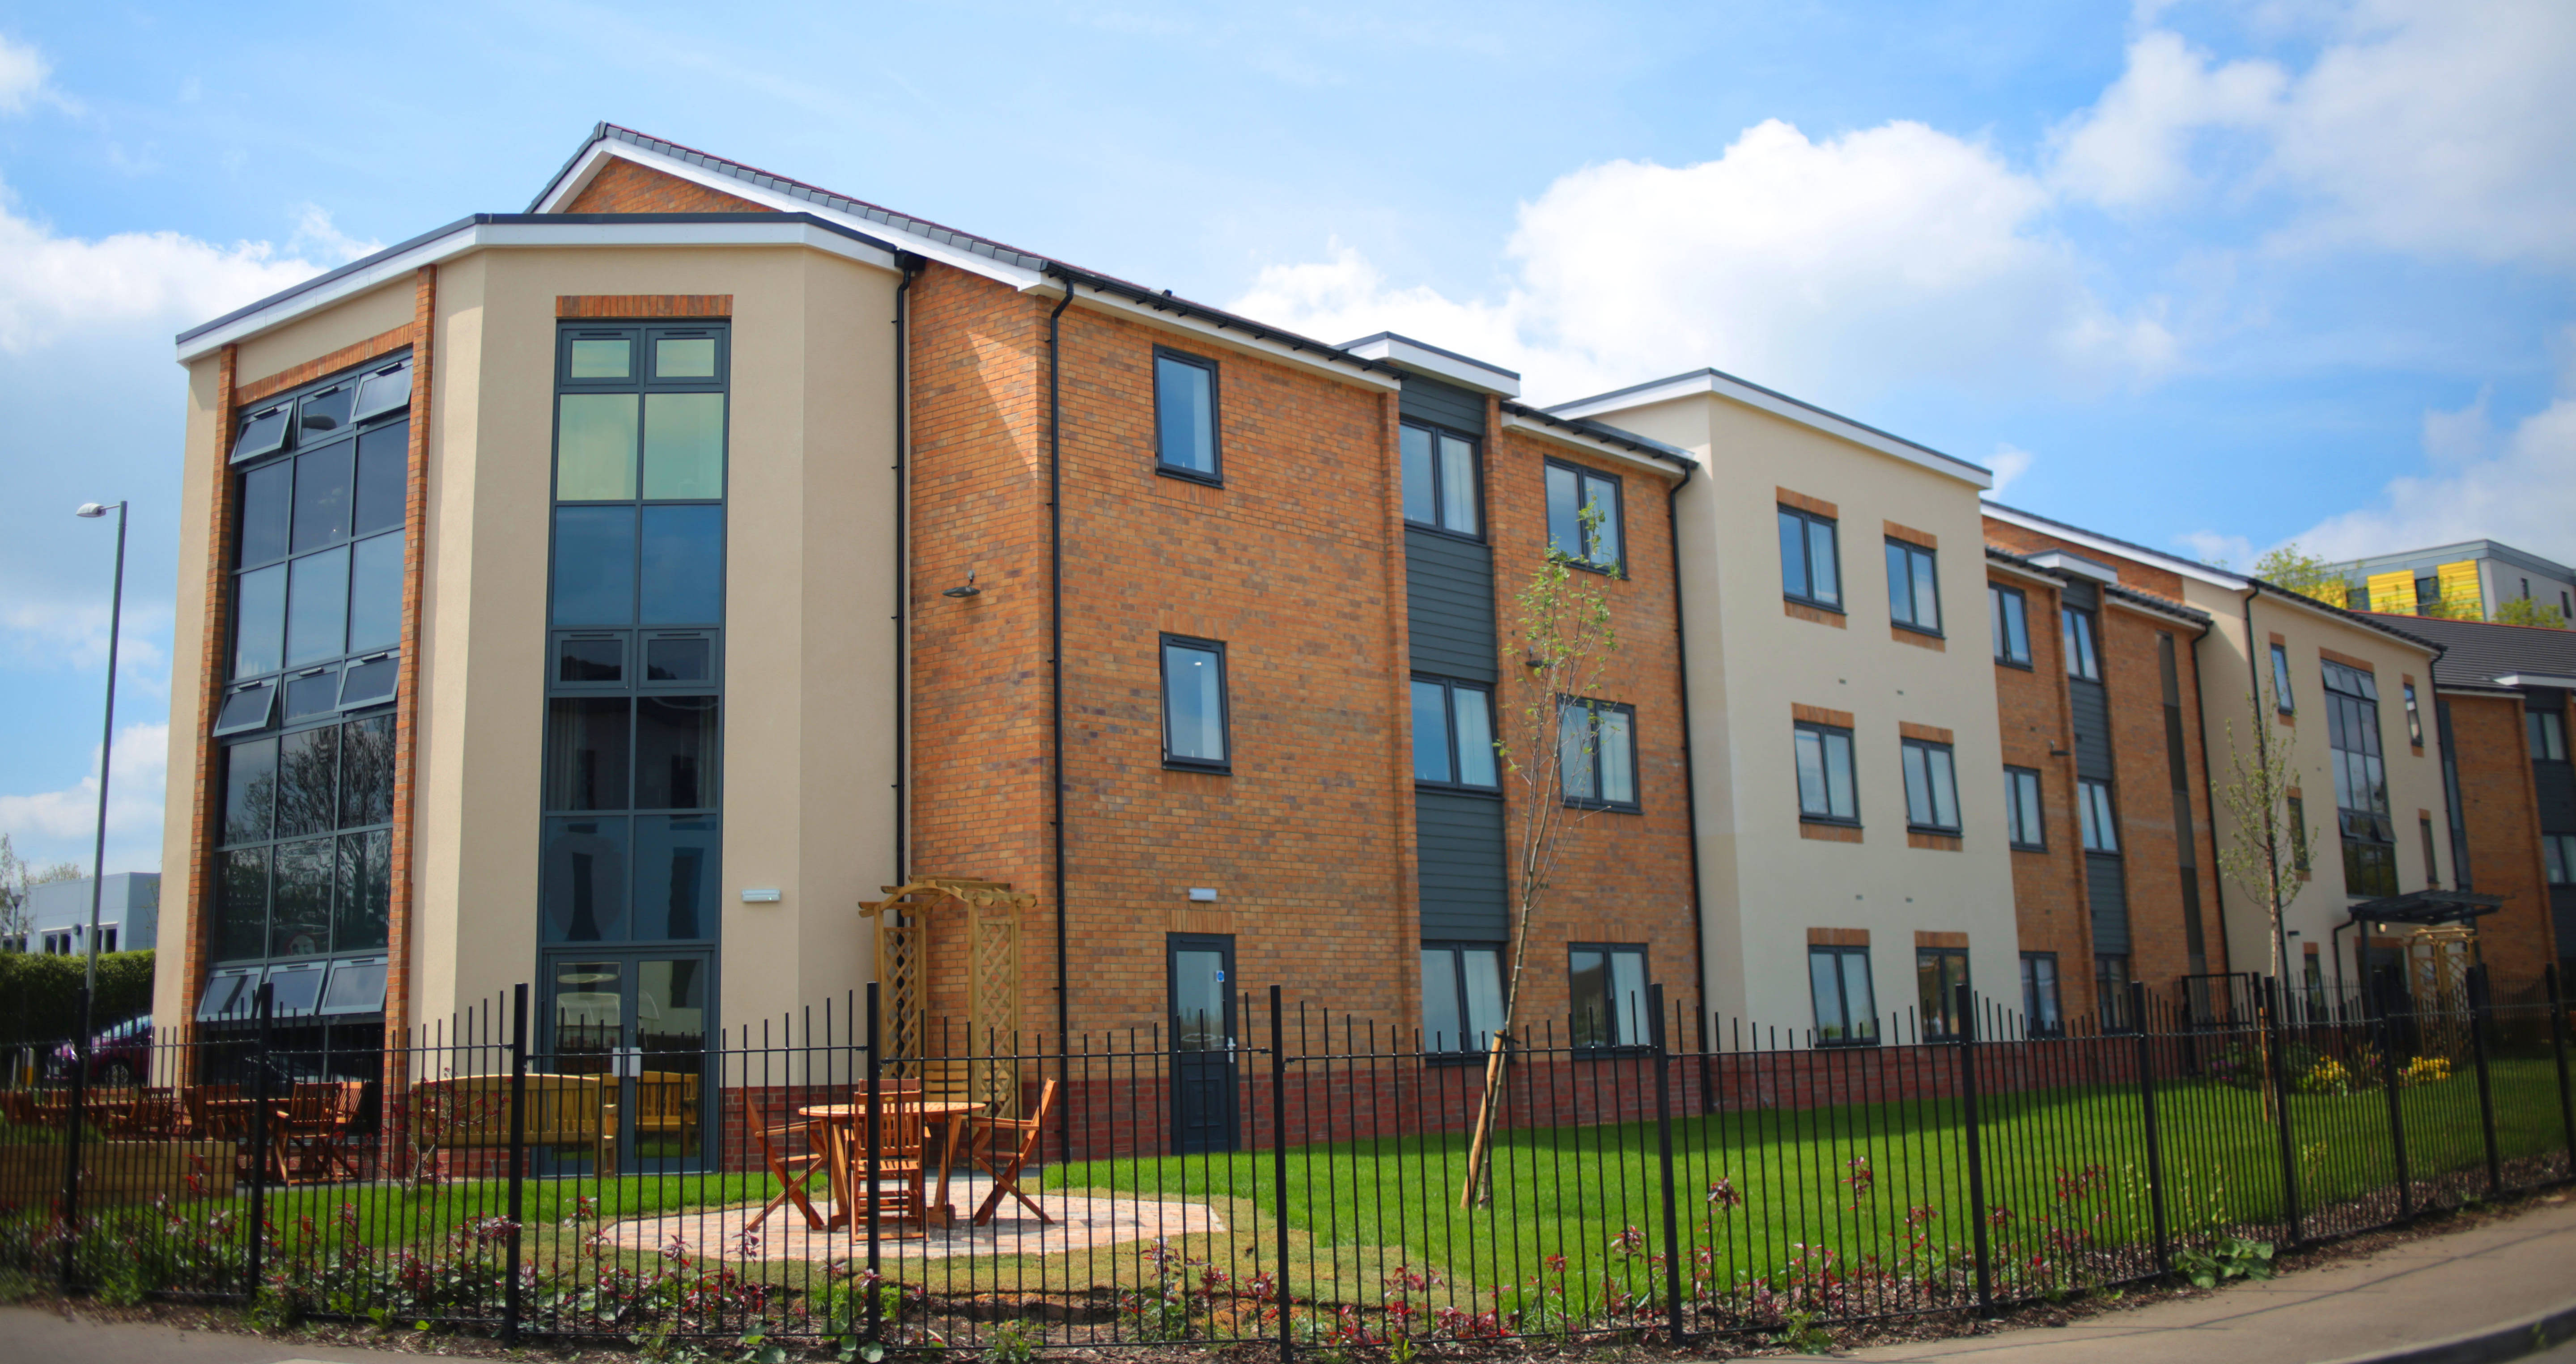 Carterwood completes sale of Bedfordshire care home to Hamberley Care Homes